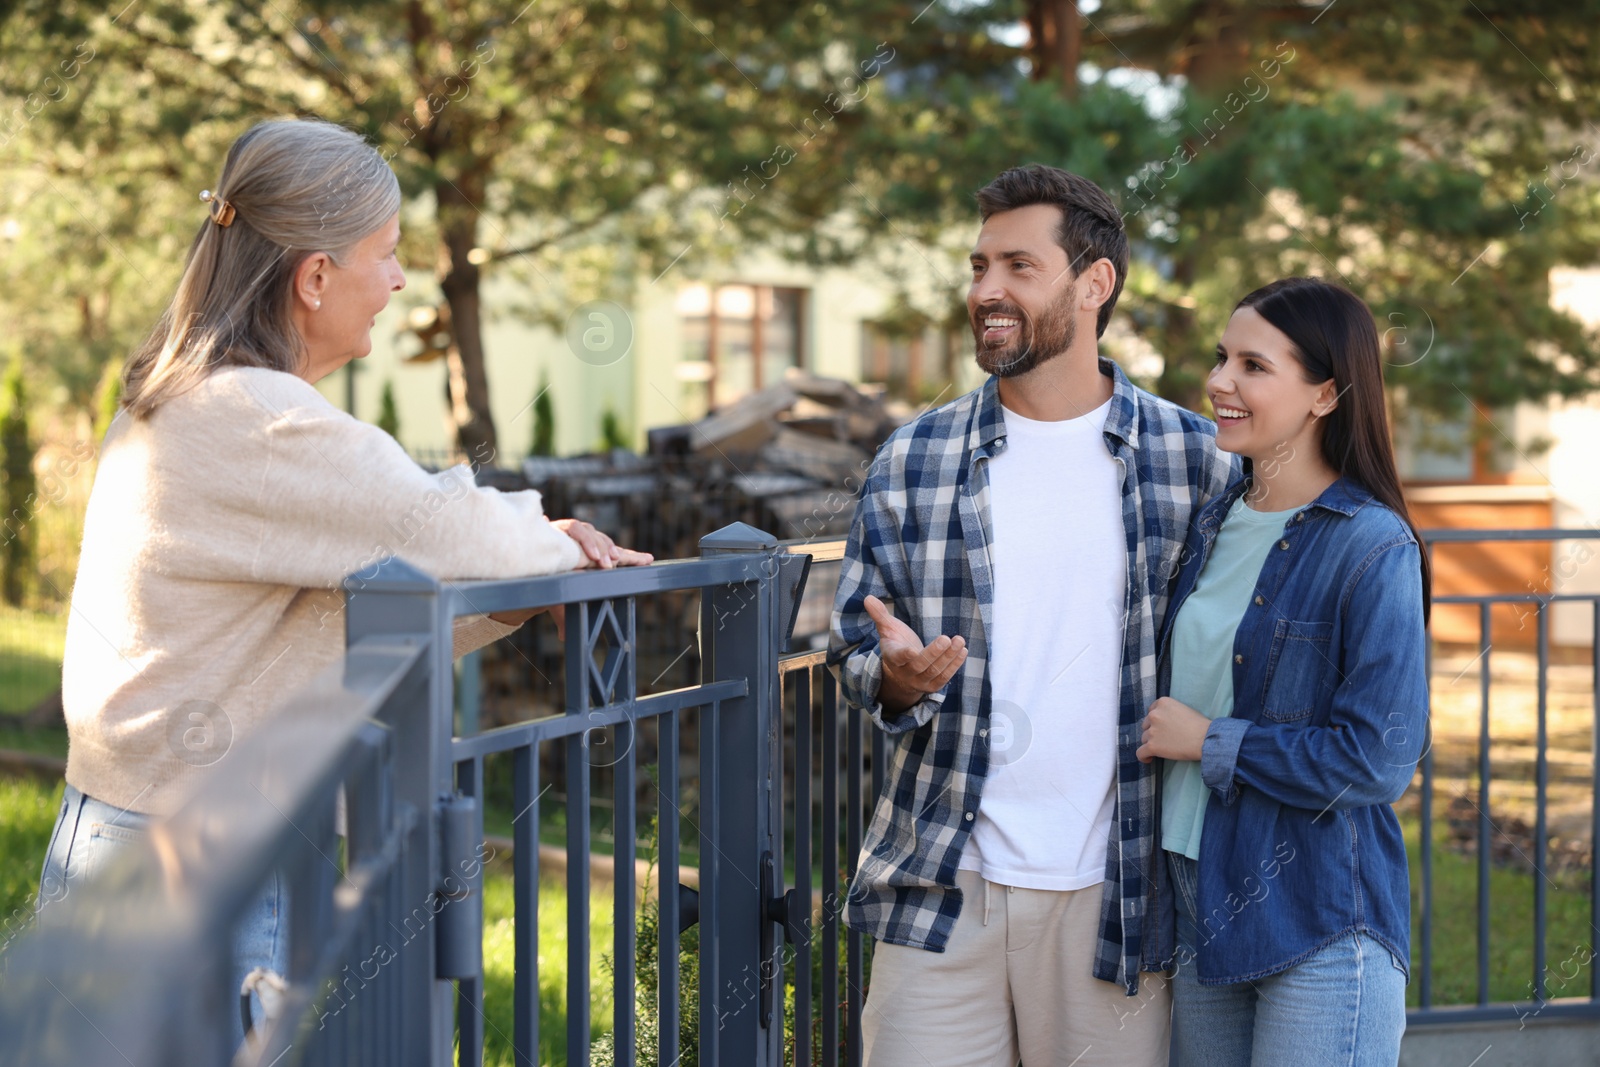 Photo of Friendly relationship with neighbours. Happy young couple talking to senior woman near fence outdoors